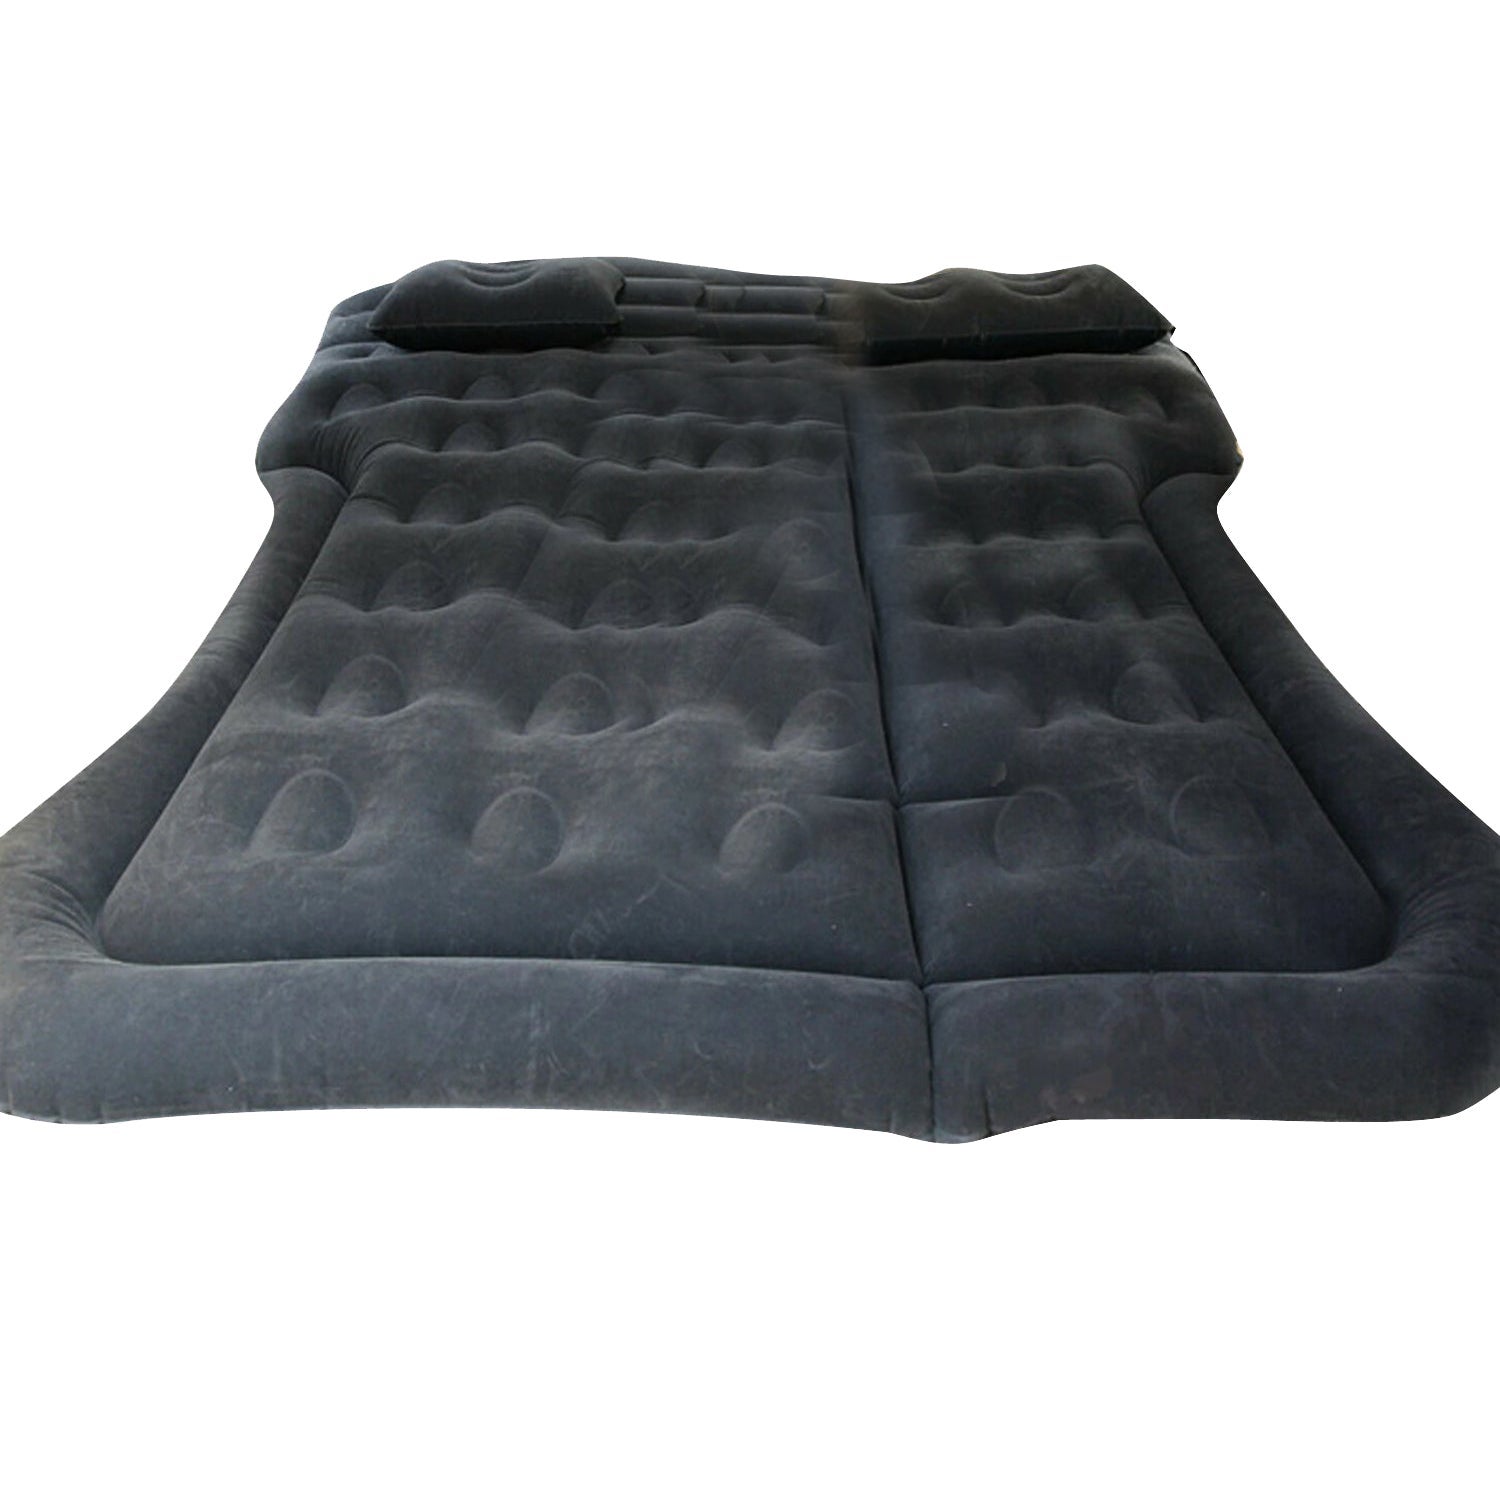 Outdoor Camping Portable inflatable Car Back Seat Sleeping Mattress